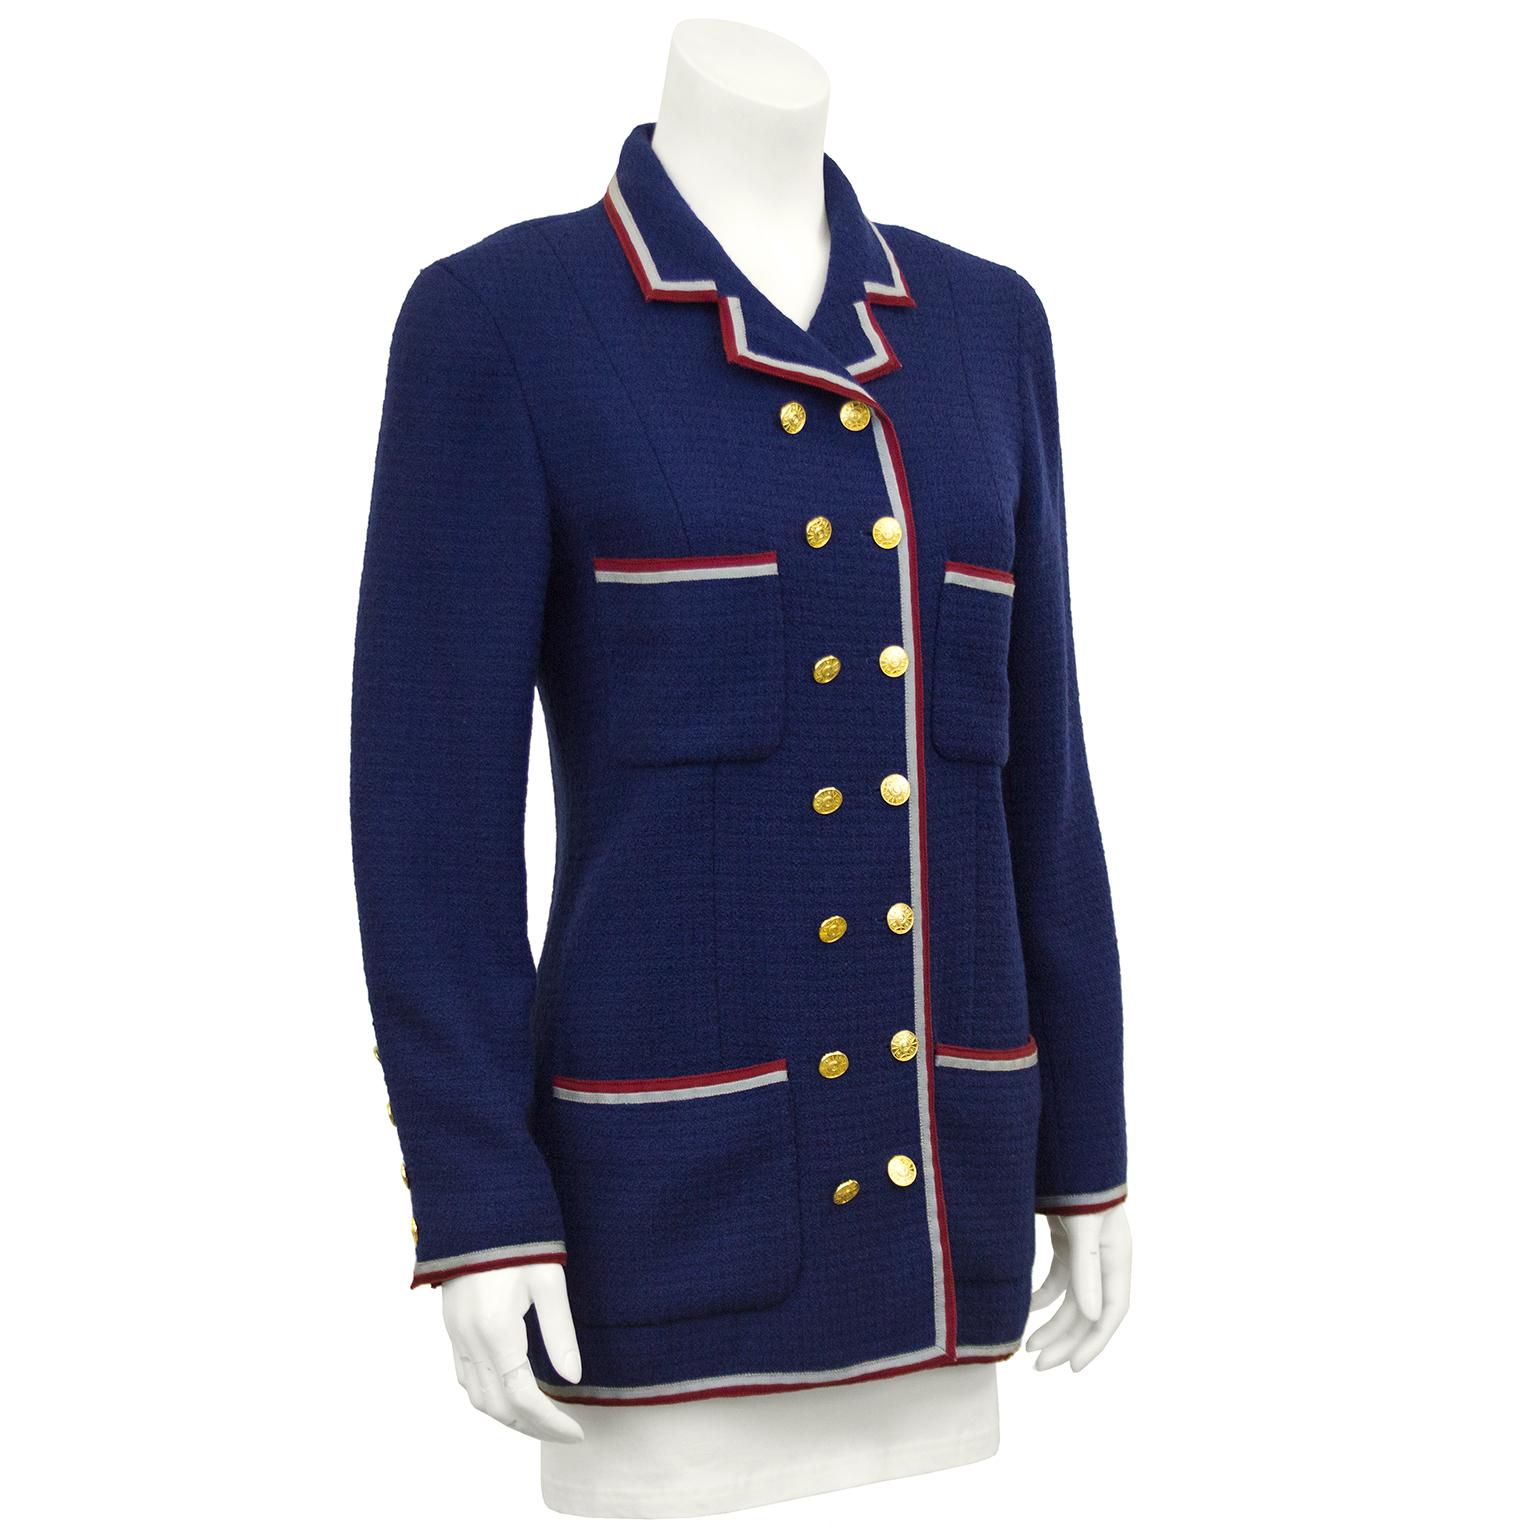 Collection 20 Chanel deep royal blue waffle wool double breasted jacket with red and grey grosgrain ribbon trim throughout. Shaped for a sleek slim look, long silhouette and dozens of gilt metal buttons on the front and sleeve cuffs. Fully lined in